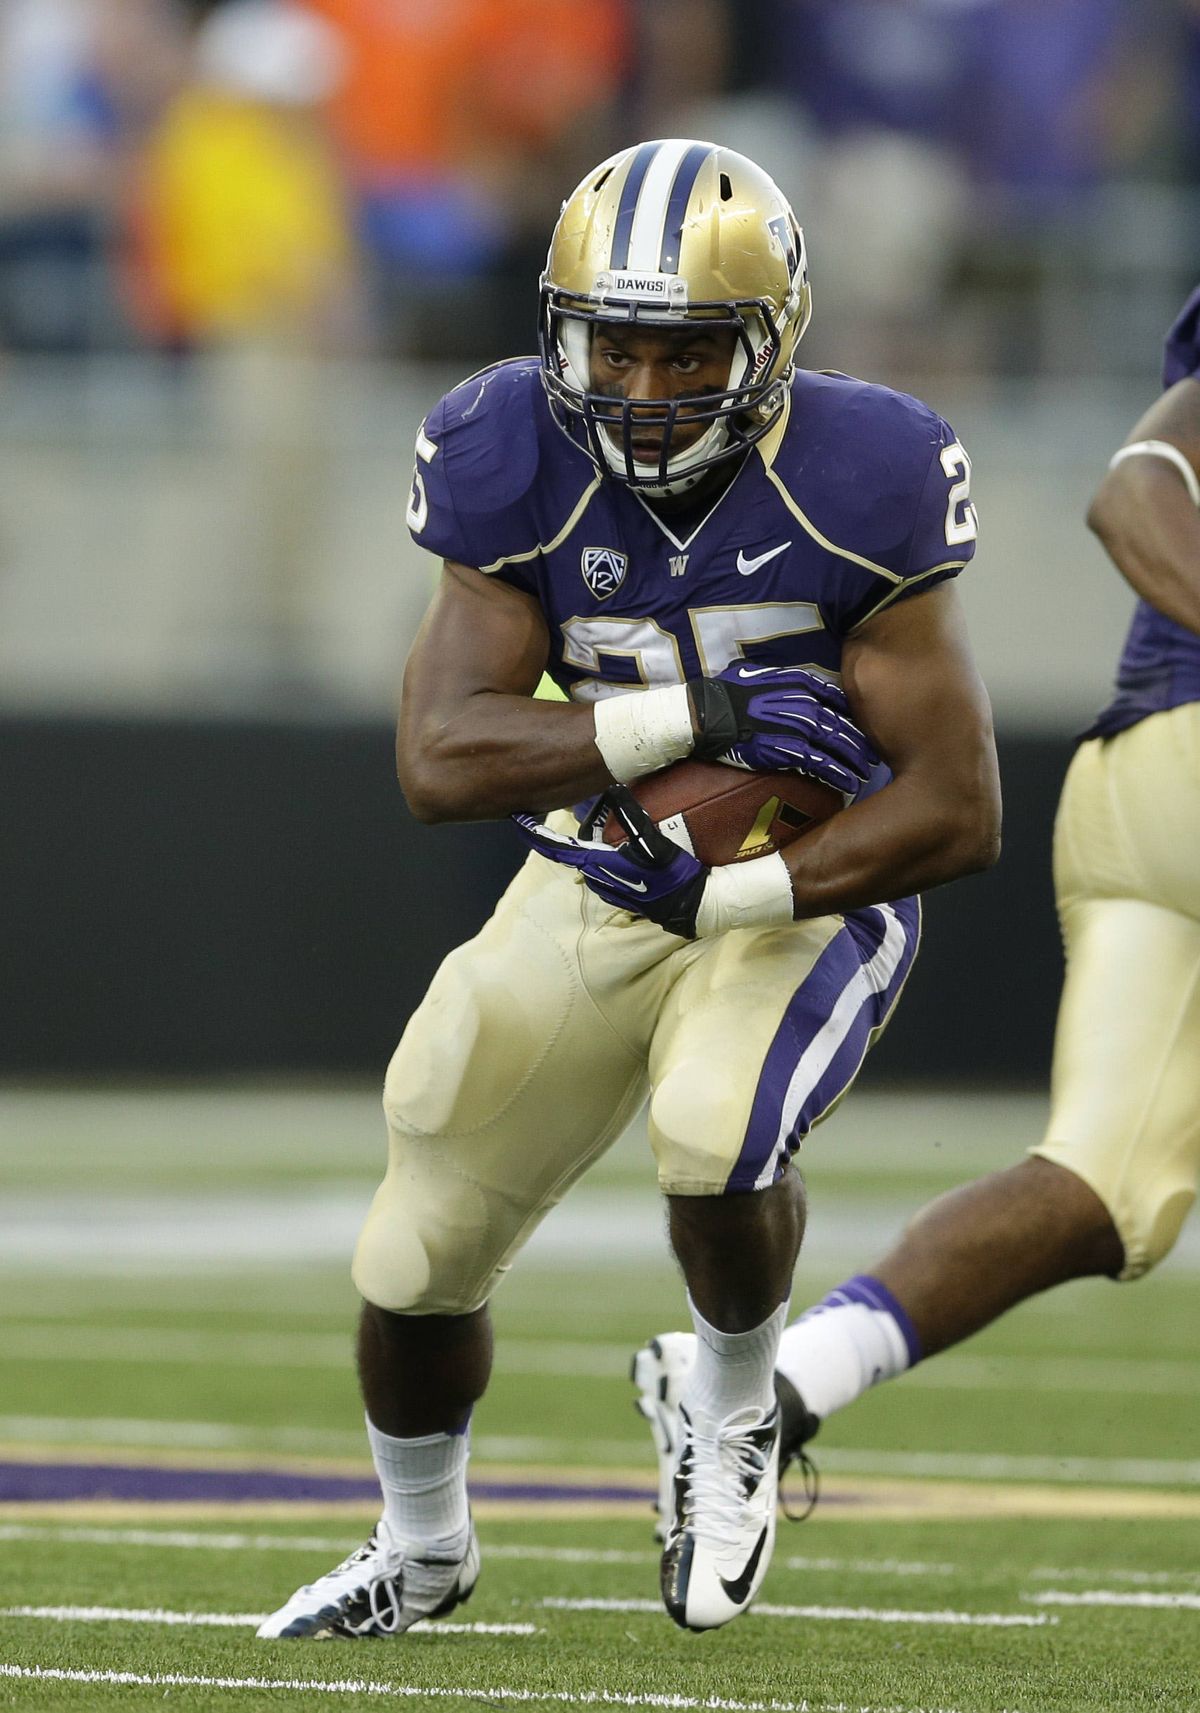 Washington Huskies RB Bishop Sankey has amassed 1,833 total yards and 18 touchdowns this season. The former G-Prep standout tailback has eight 100- plus-yard rushing games and has scored at least one TD in every game this season.